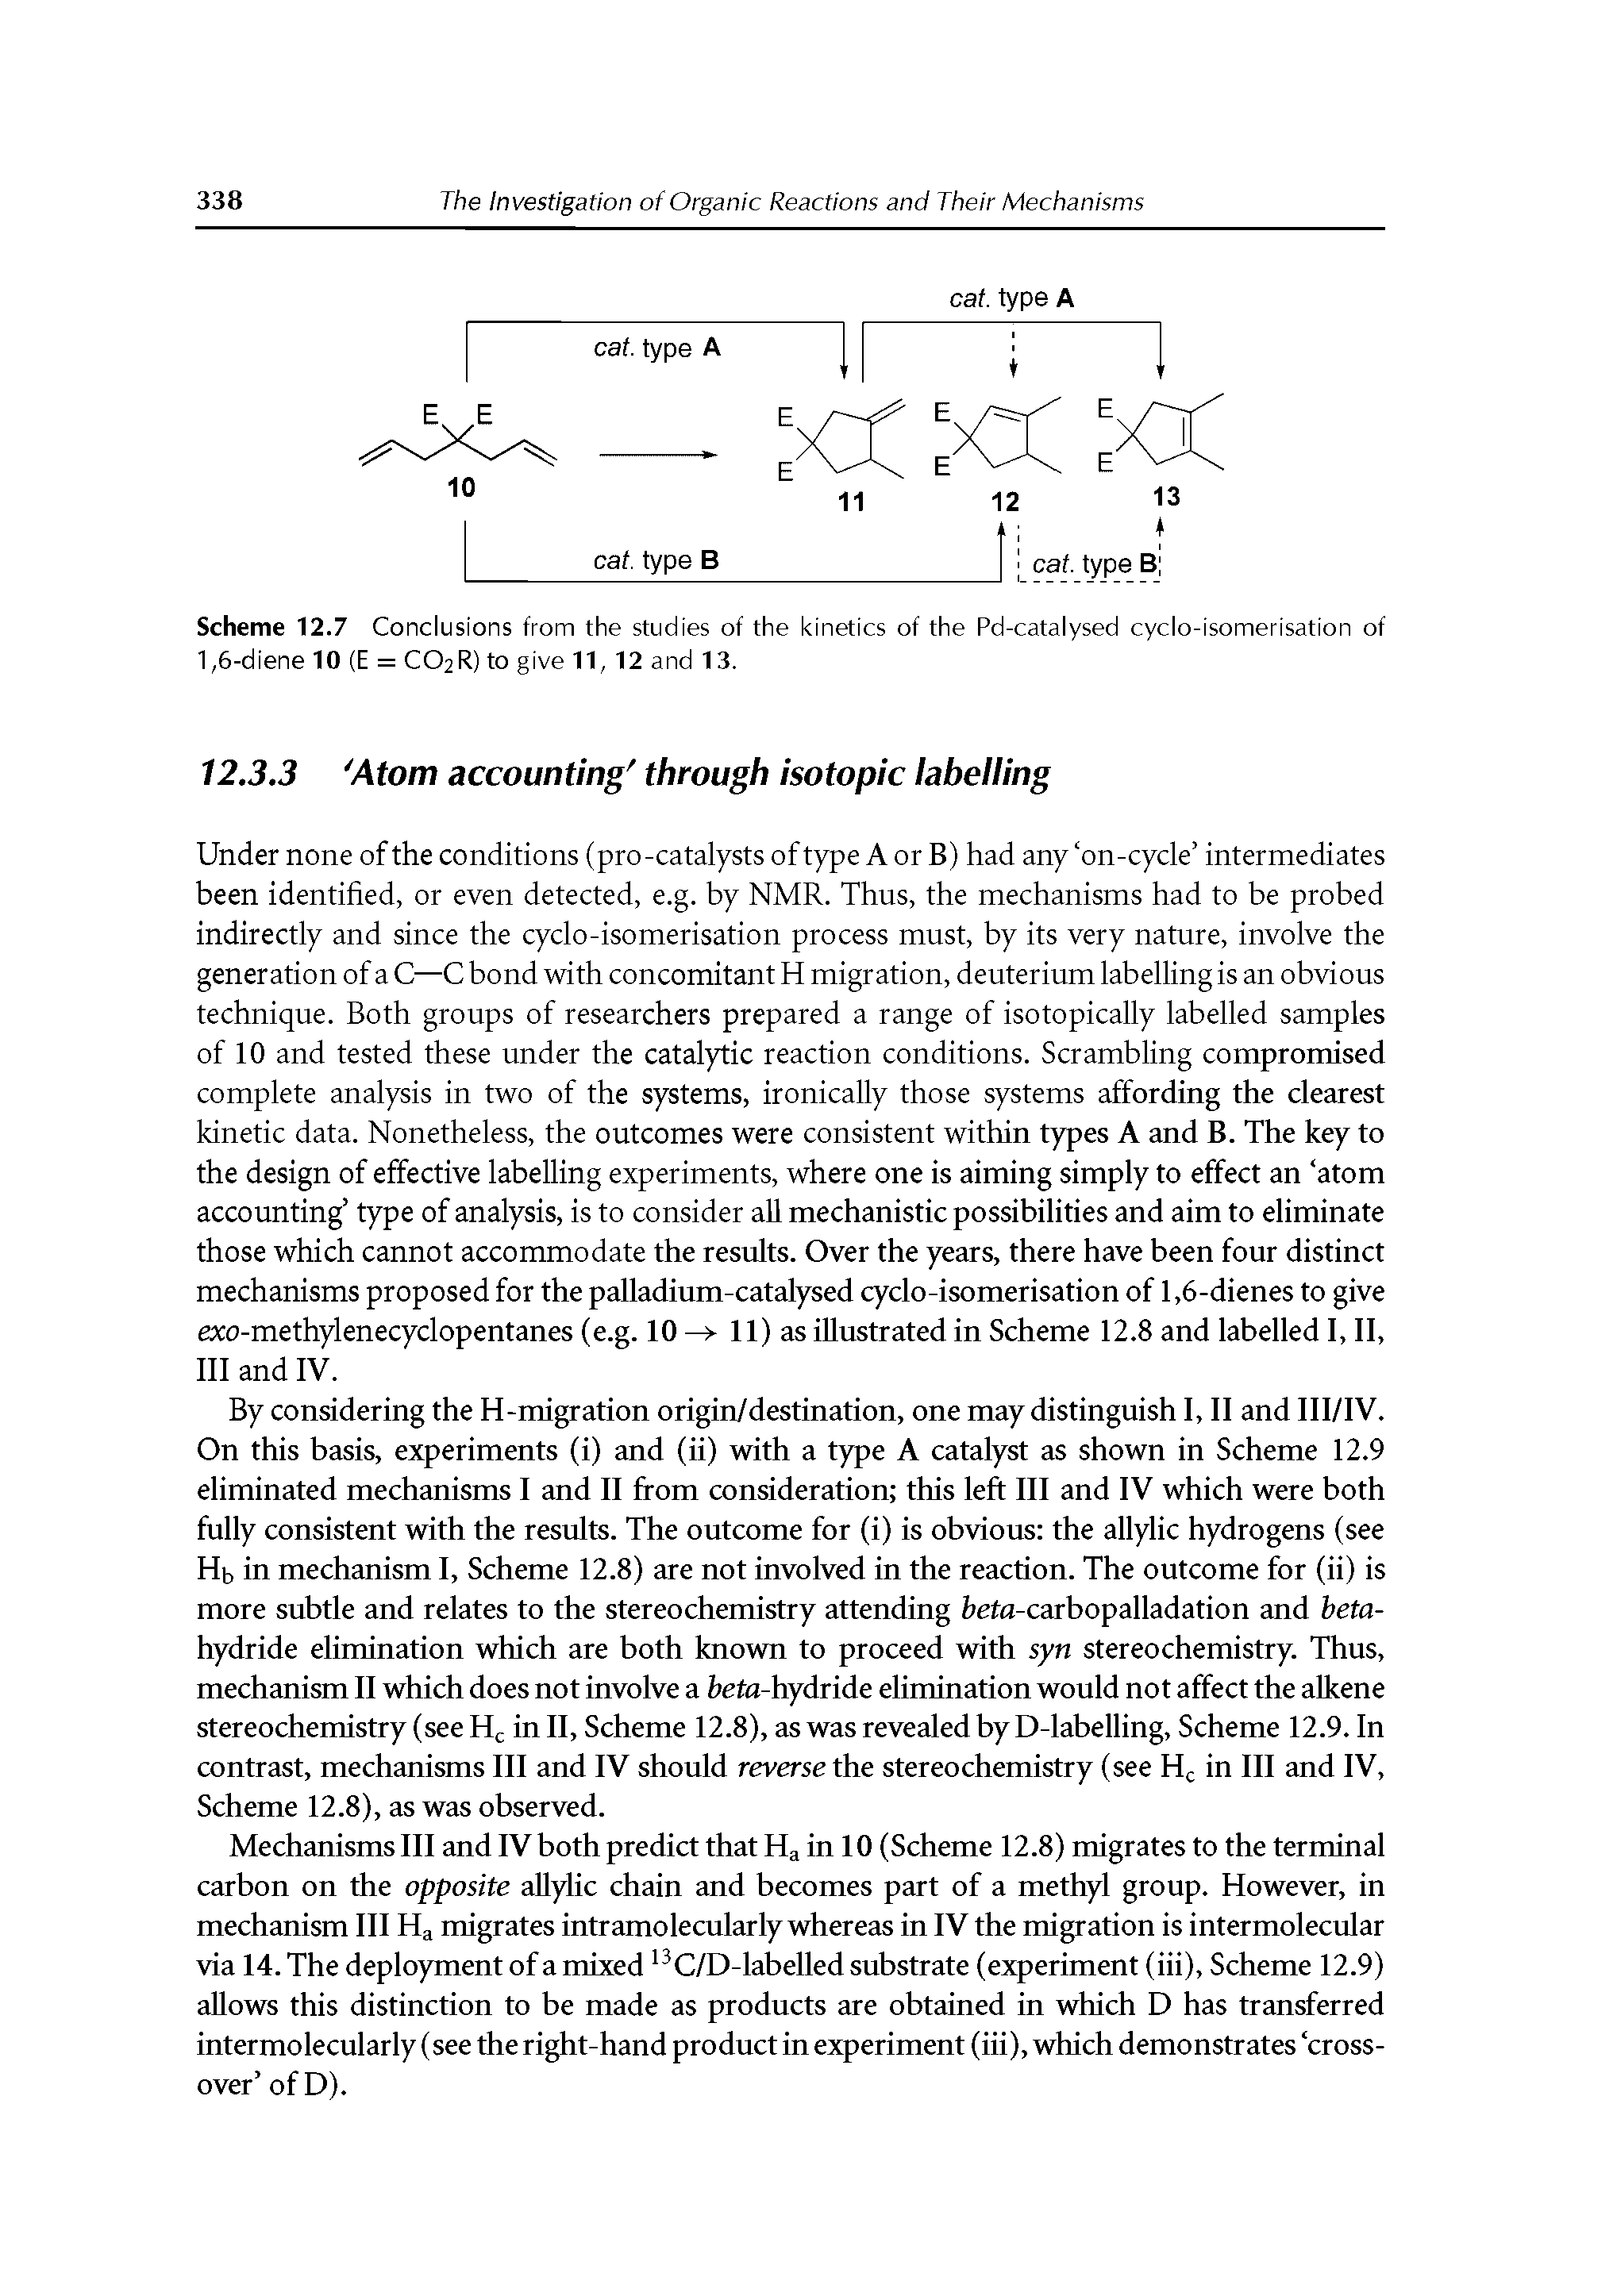 Scheme 12.7 Conclusions from the studies of the kinetics of the Pd-catalysed cyclo-isomerisation of 1,6-diene 10 (E = CO2R) to give 11, 12 and 13.